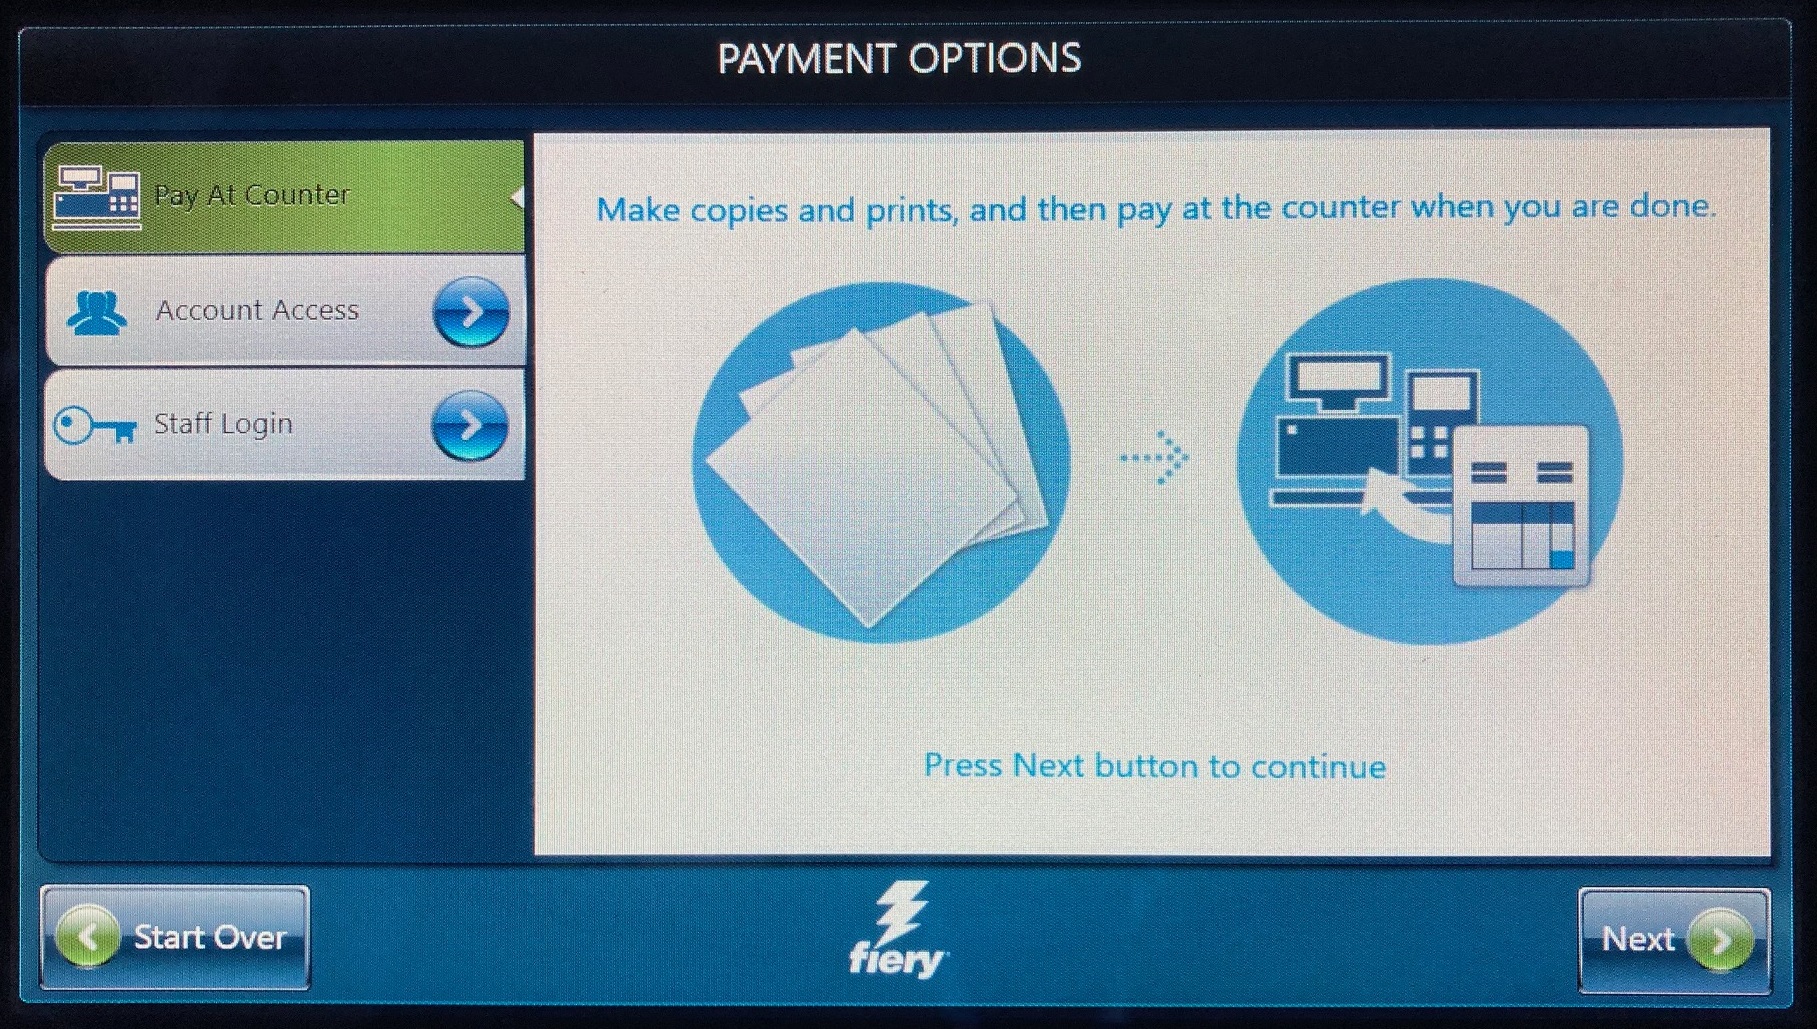 Payment options screen with Pay At Counter at the top